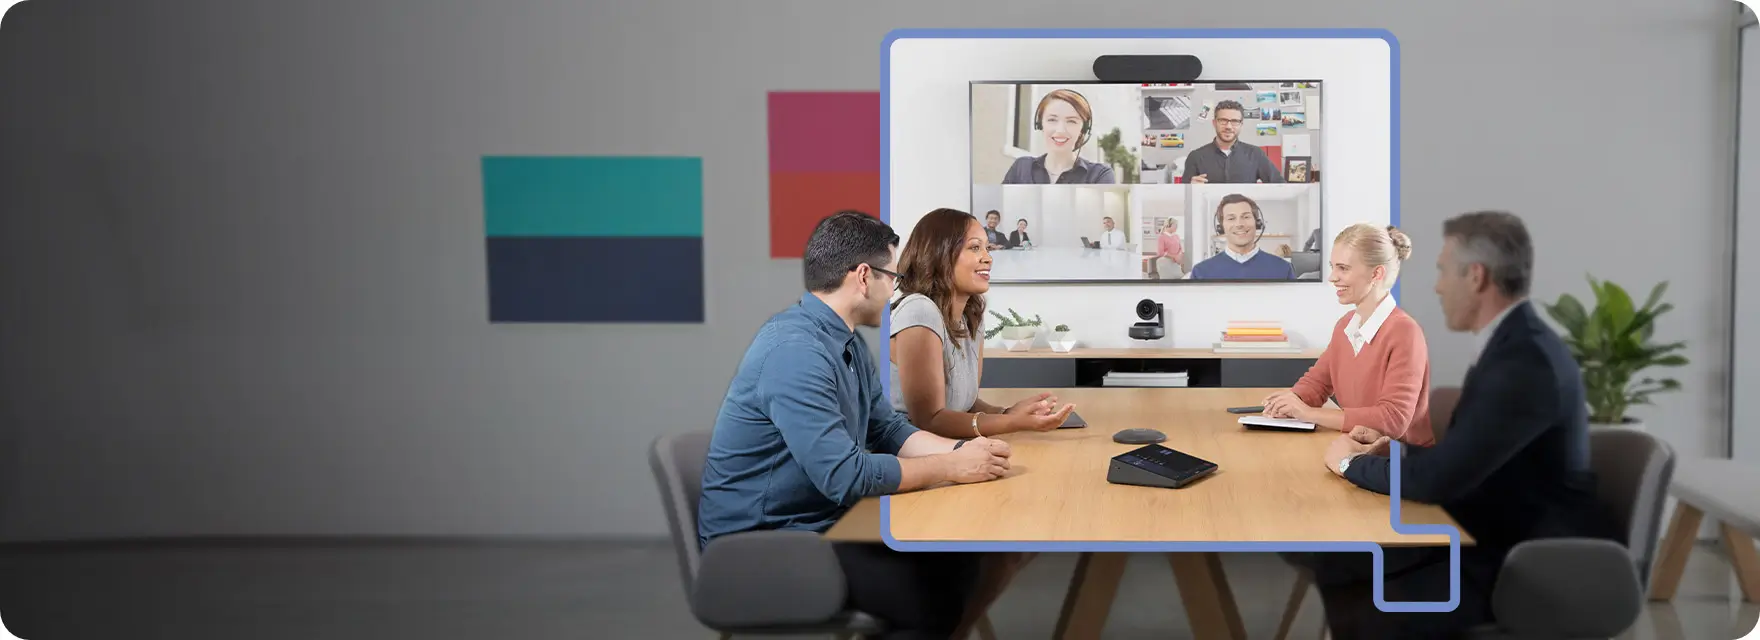 A meeting being conducted, presumably on Microsoft Teams Rooms